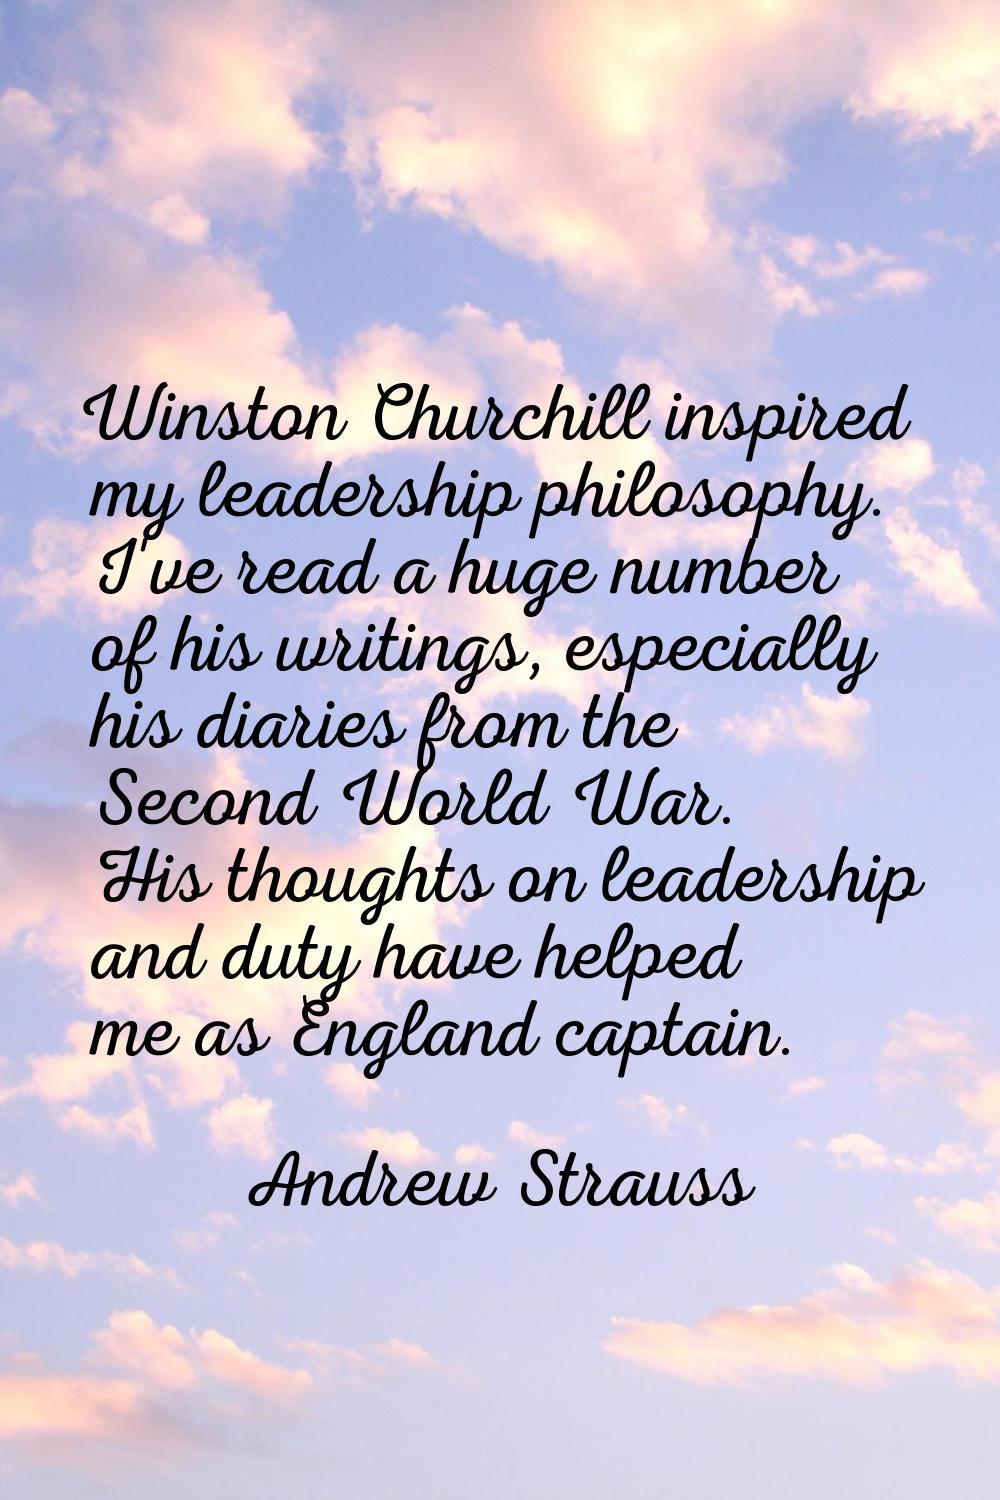 Winston Churchill inspired my leadership philosophy. I've read a huge number of his writings, espec